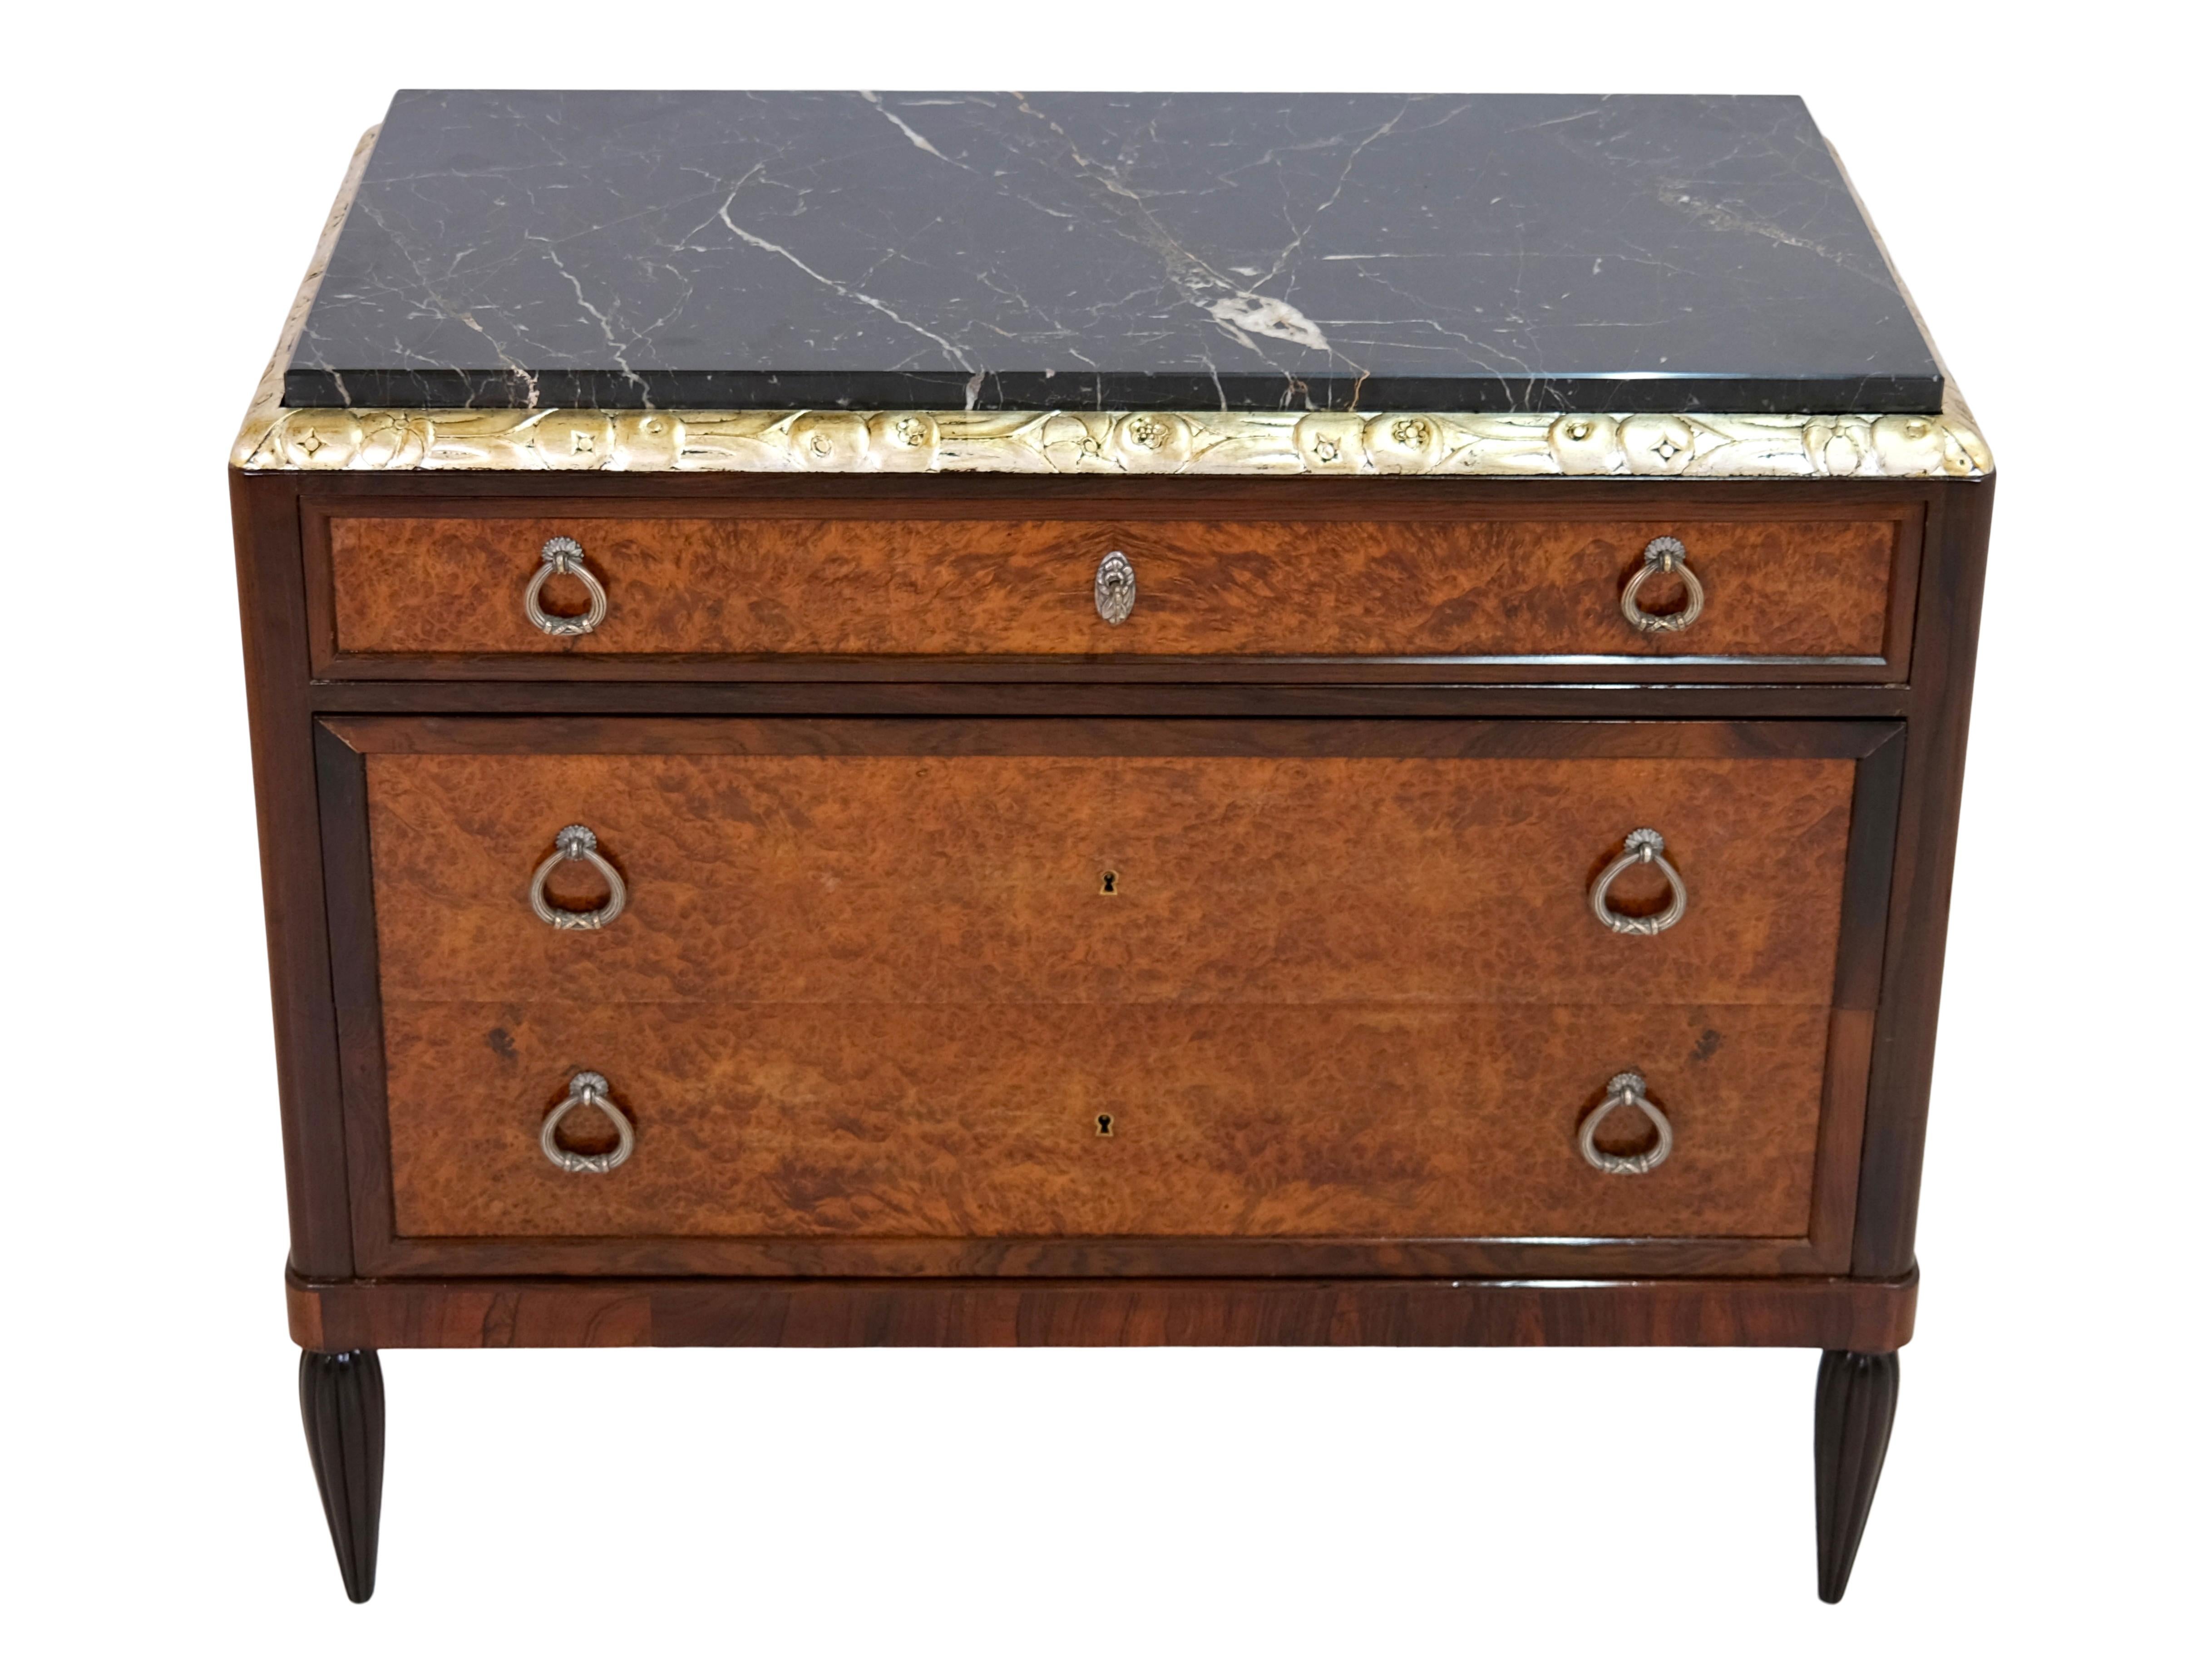 Early chest of drawers with three drawers 
Ébénisterie Haentgés Frères Paris, multiple signatures

Mahogany and Amboina, shellac hand polished
Floral ornamentation, silvered 
Marble top

Early Art Deco, France circa